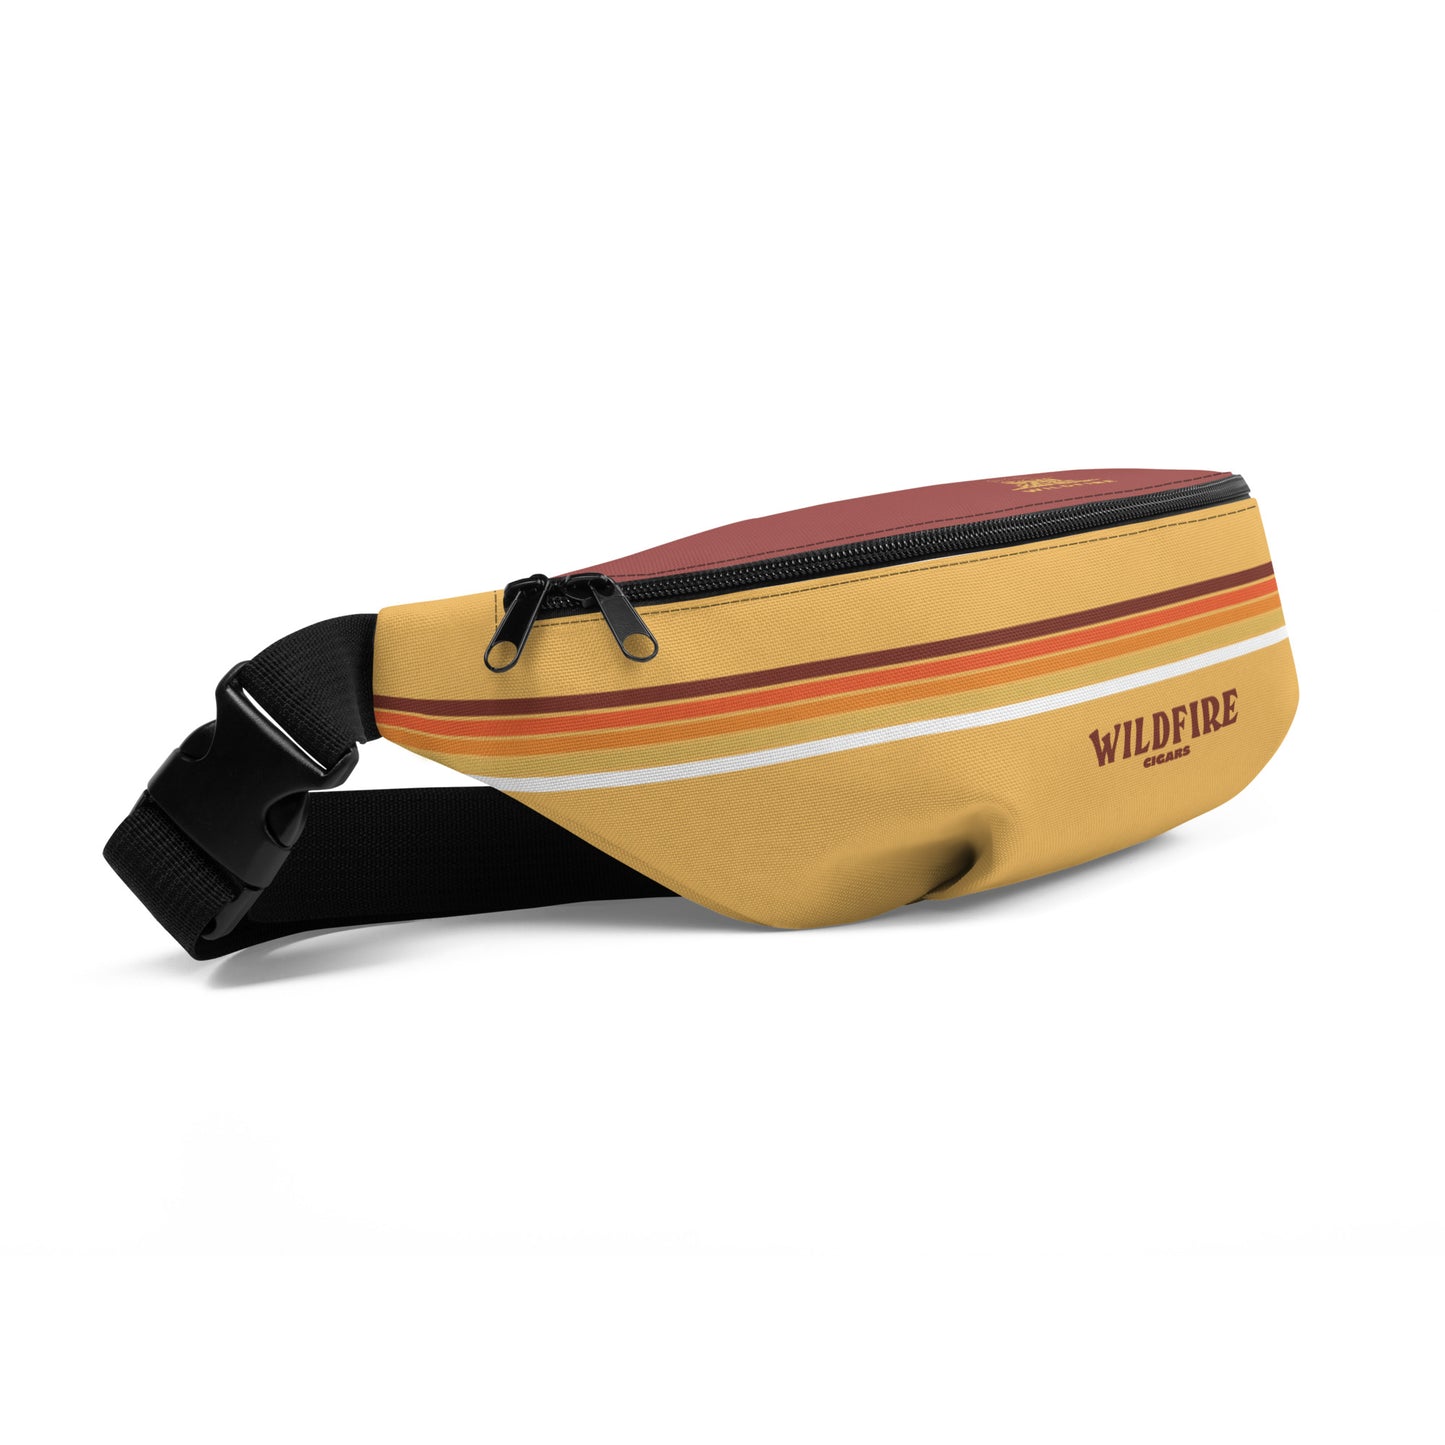 Wildfire Cigars retro camp counselor fanny pack from the front right